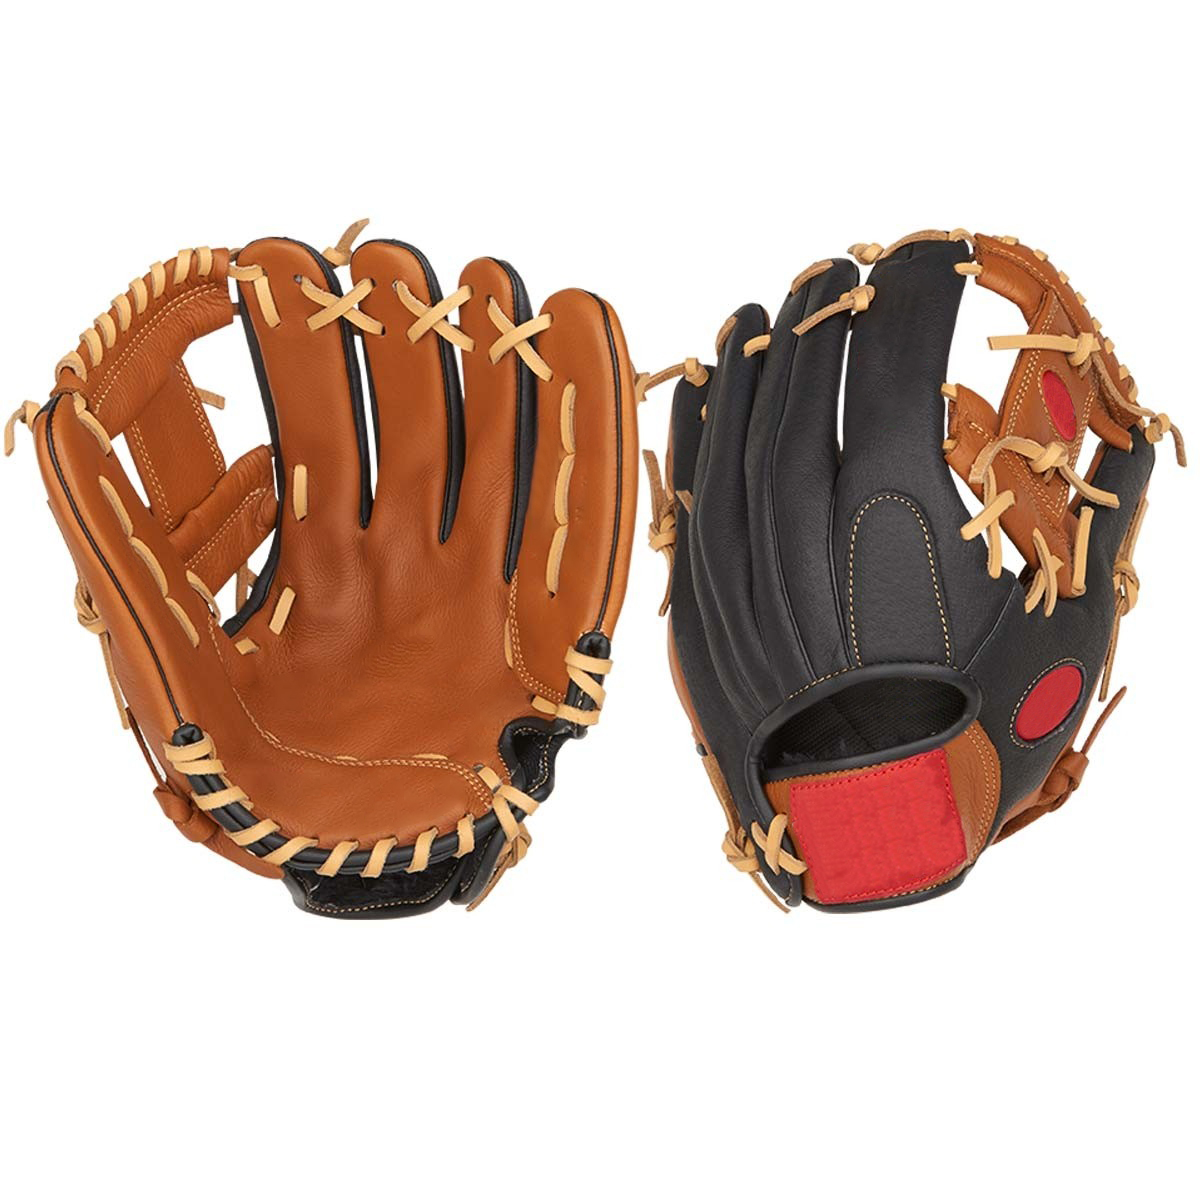 11.5"Black/Brown youth all leather infield baseball gloves